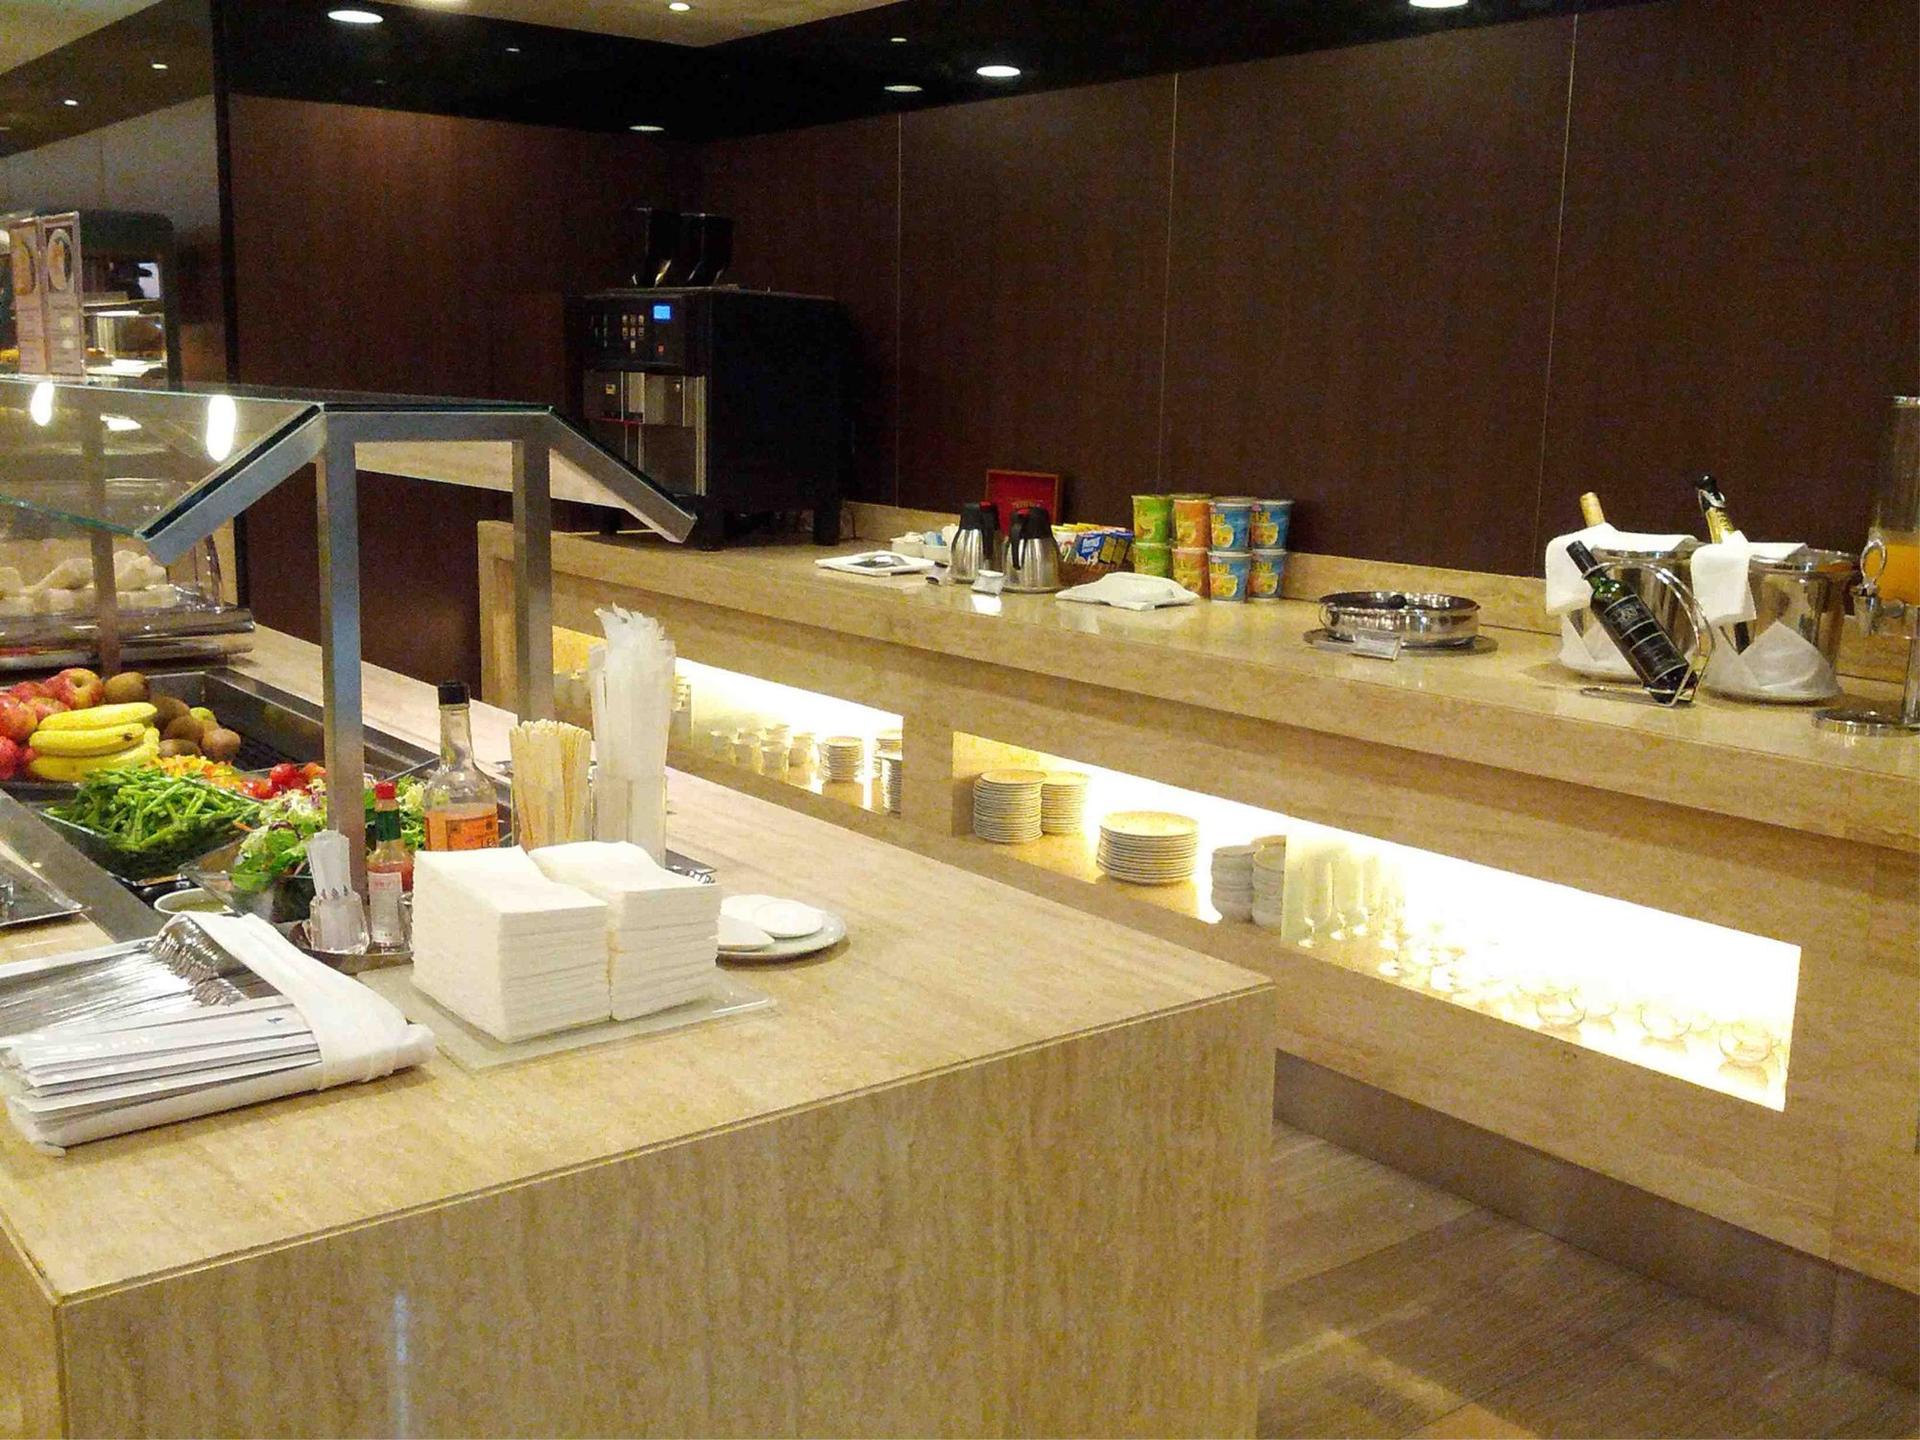 Singapore Airlines SilverKris Business Class Lounge image 6 of 68